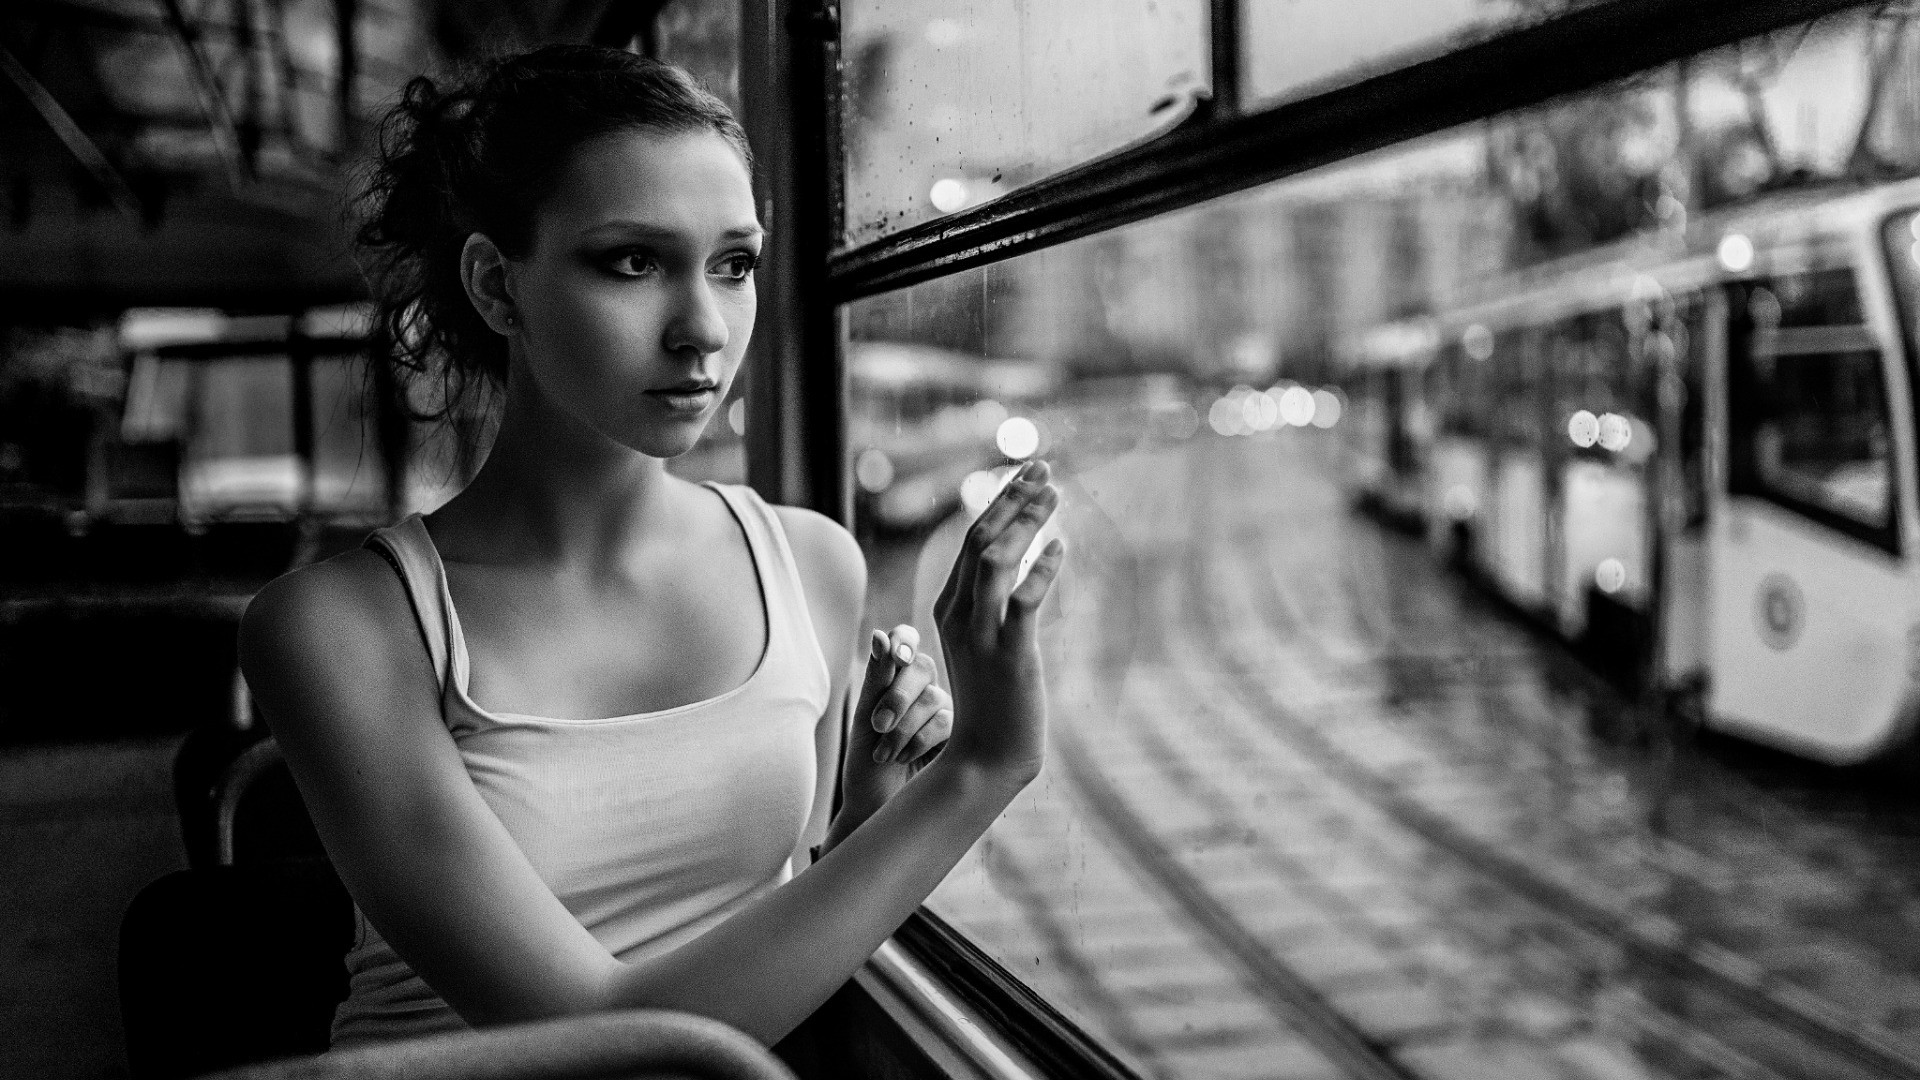 People 1920x1080 women monochrome train vehicle looking out window hands on glass model face sitting in bus